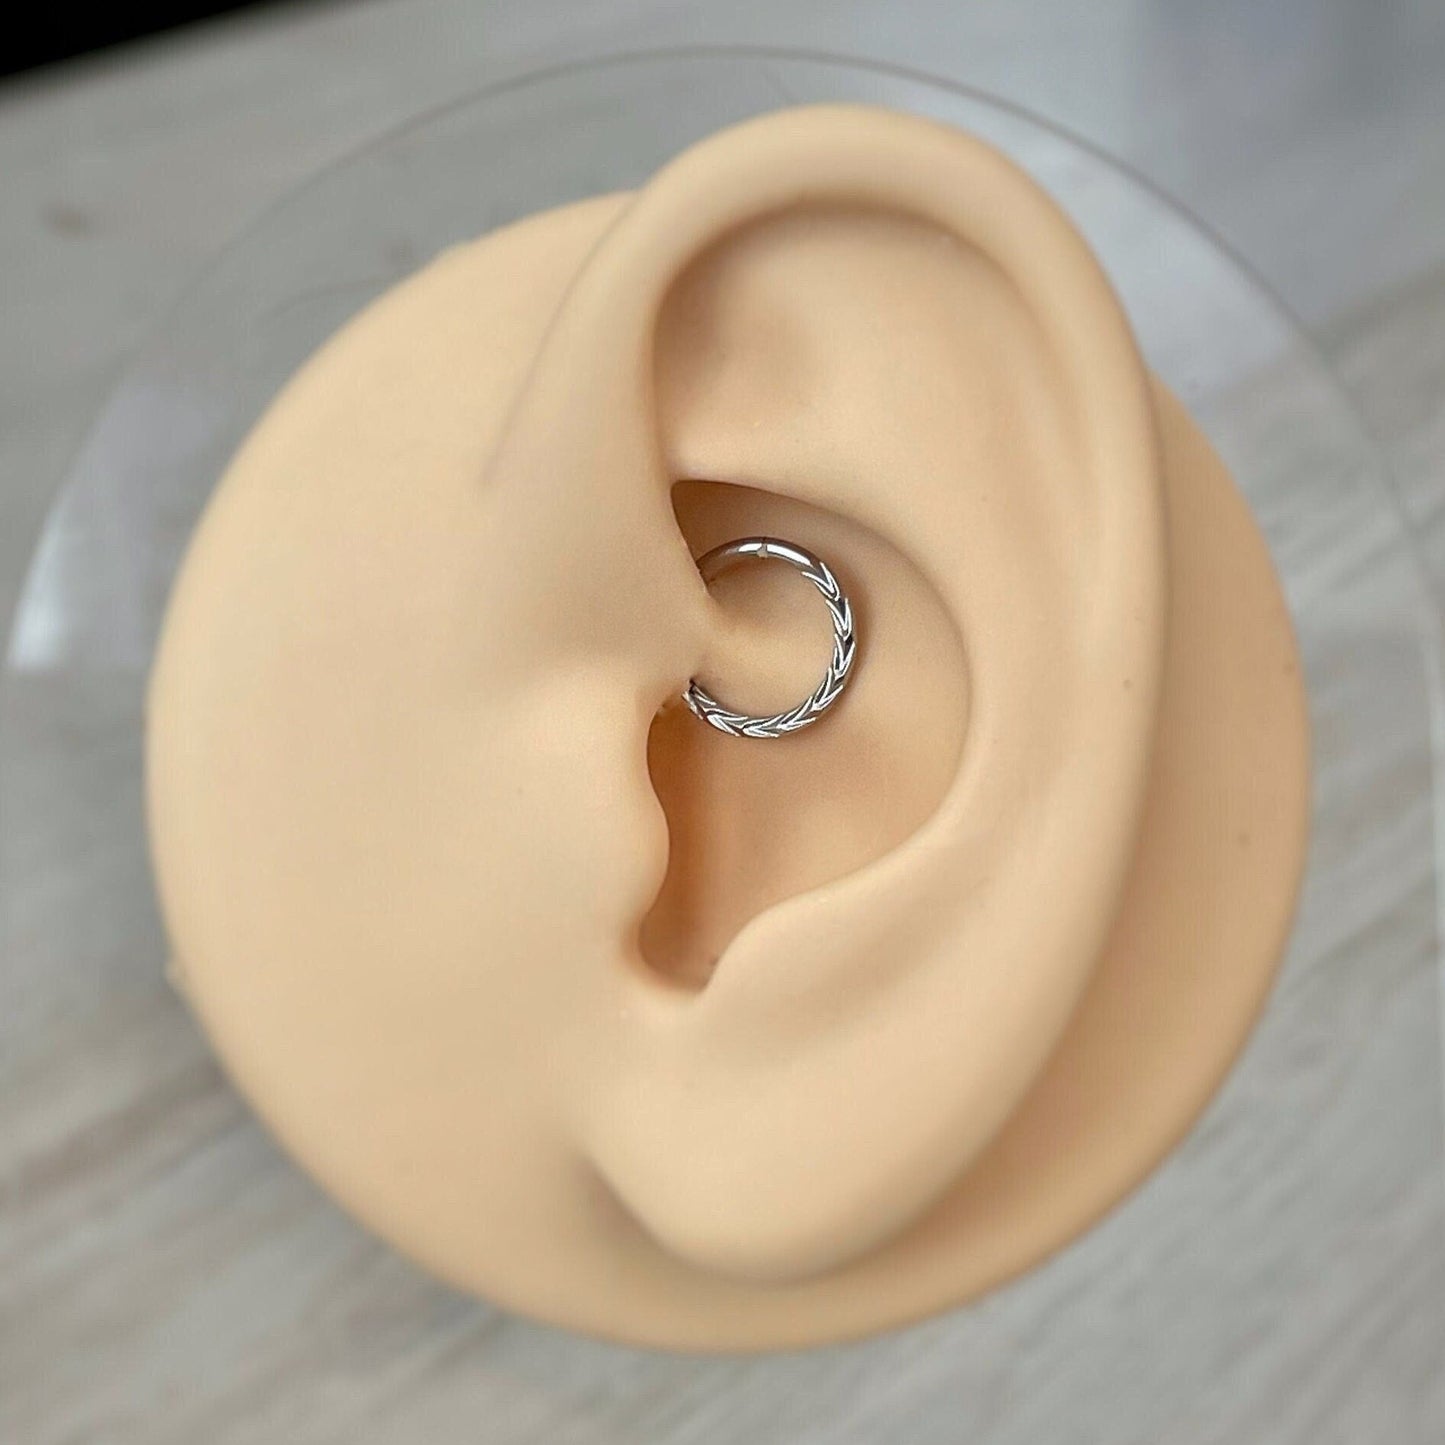 Silver Daith Earring (16G | 6mm, 8mm, or 10mm | Surgical Steel | Gold or Silver)